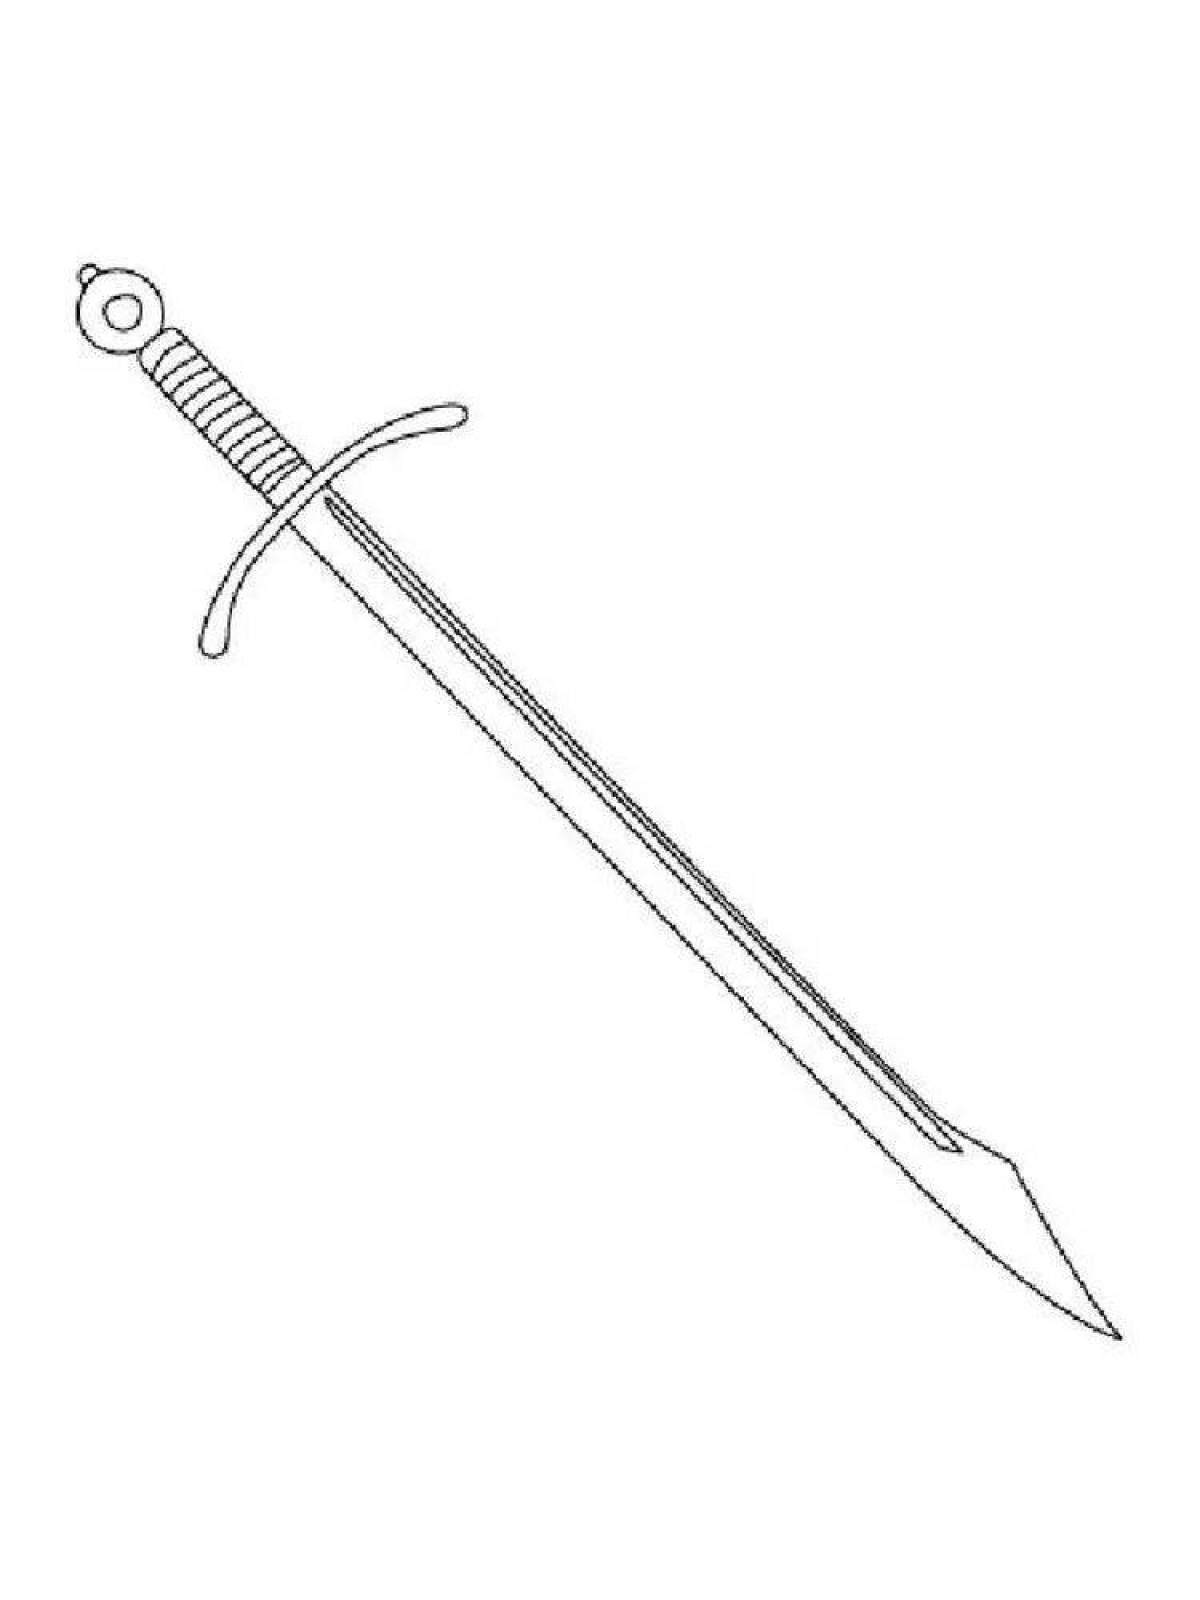 Adorable sword coloring book for kids